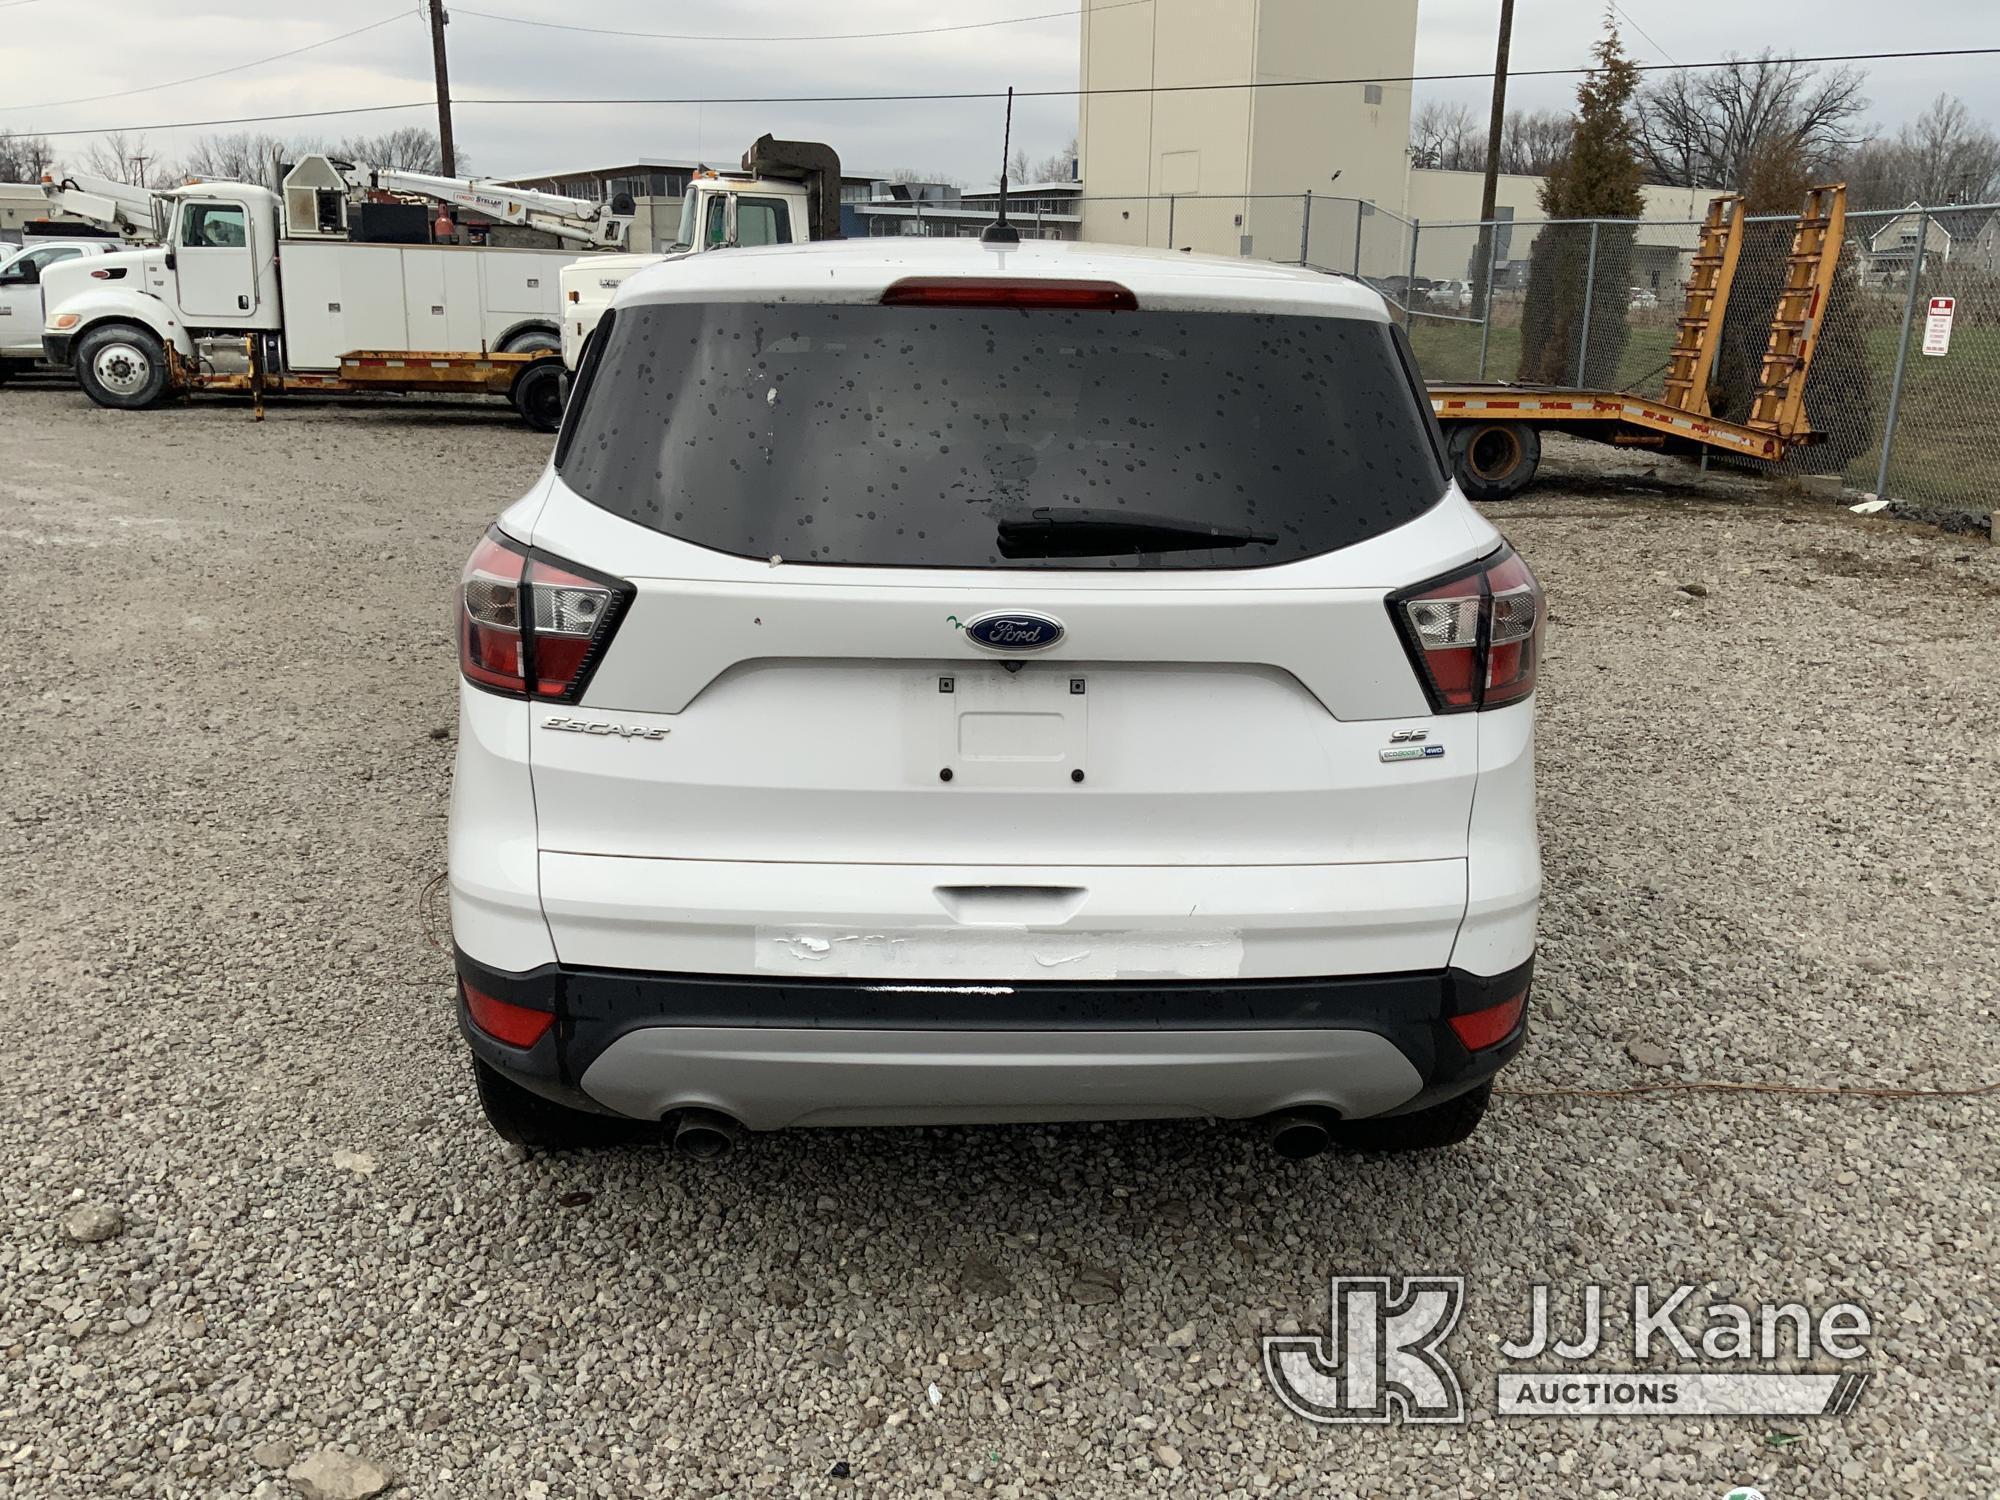 (Fort Wayne, IN) 2017 Ford Escape 4x4 4-Door Sport Utility Vehicle Not Running, Condition Unknown